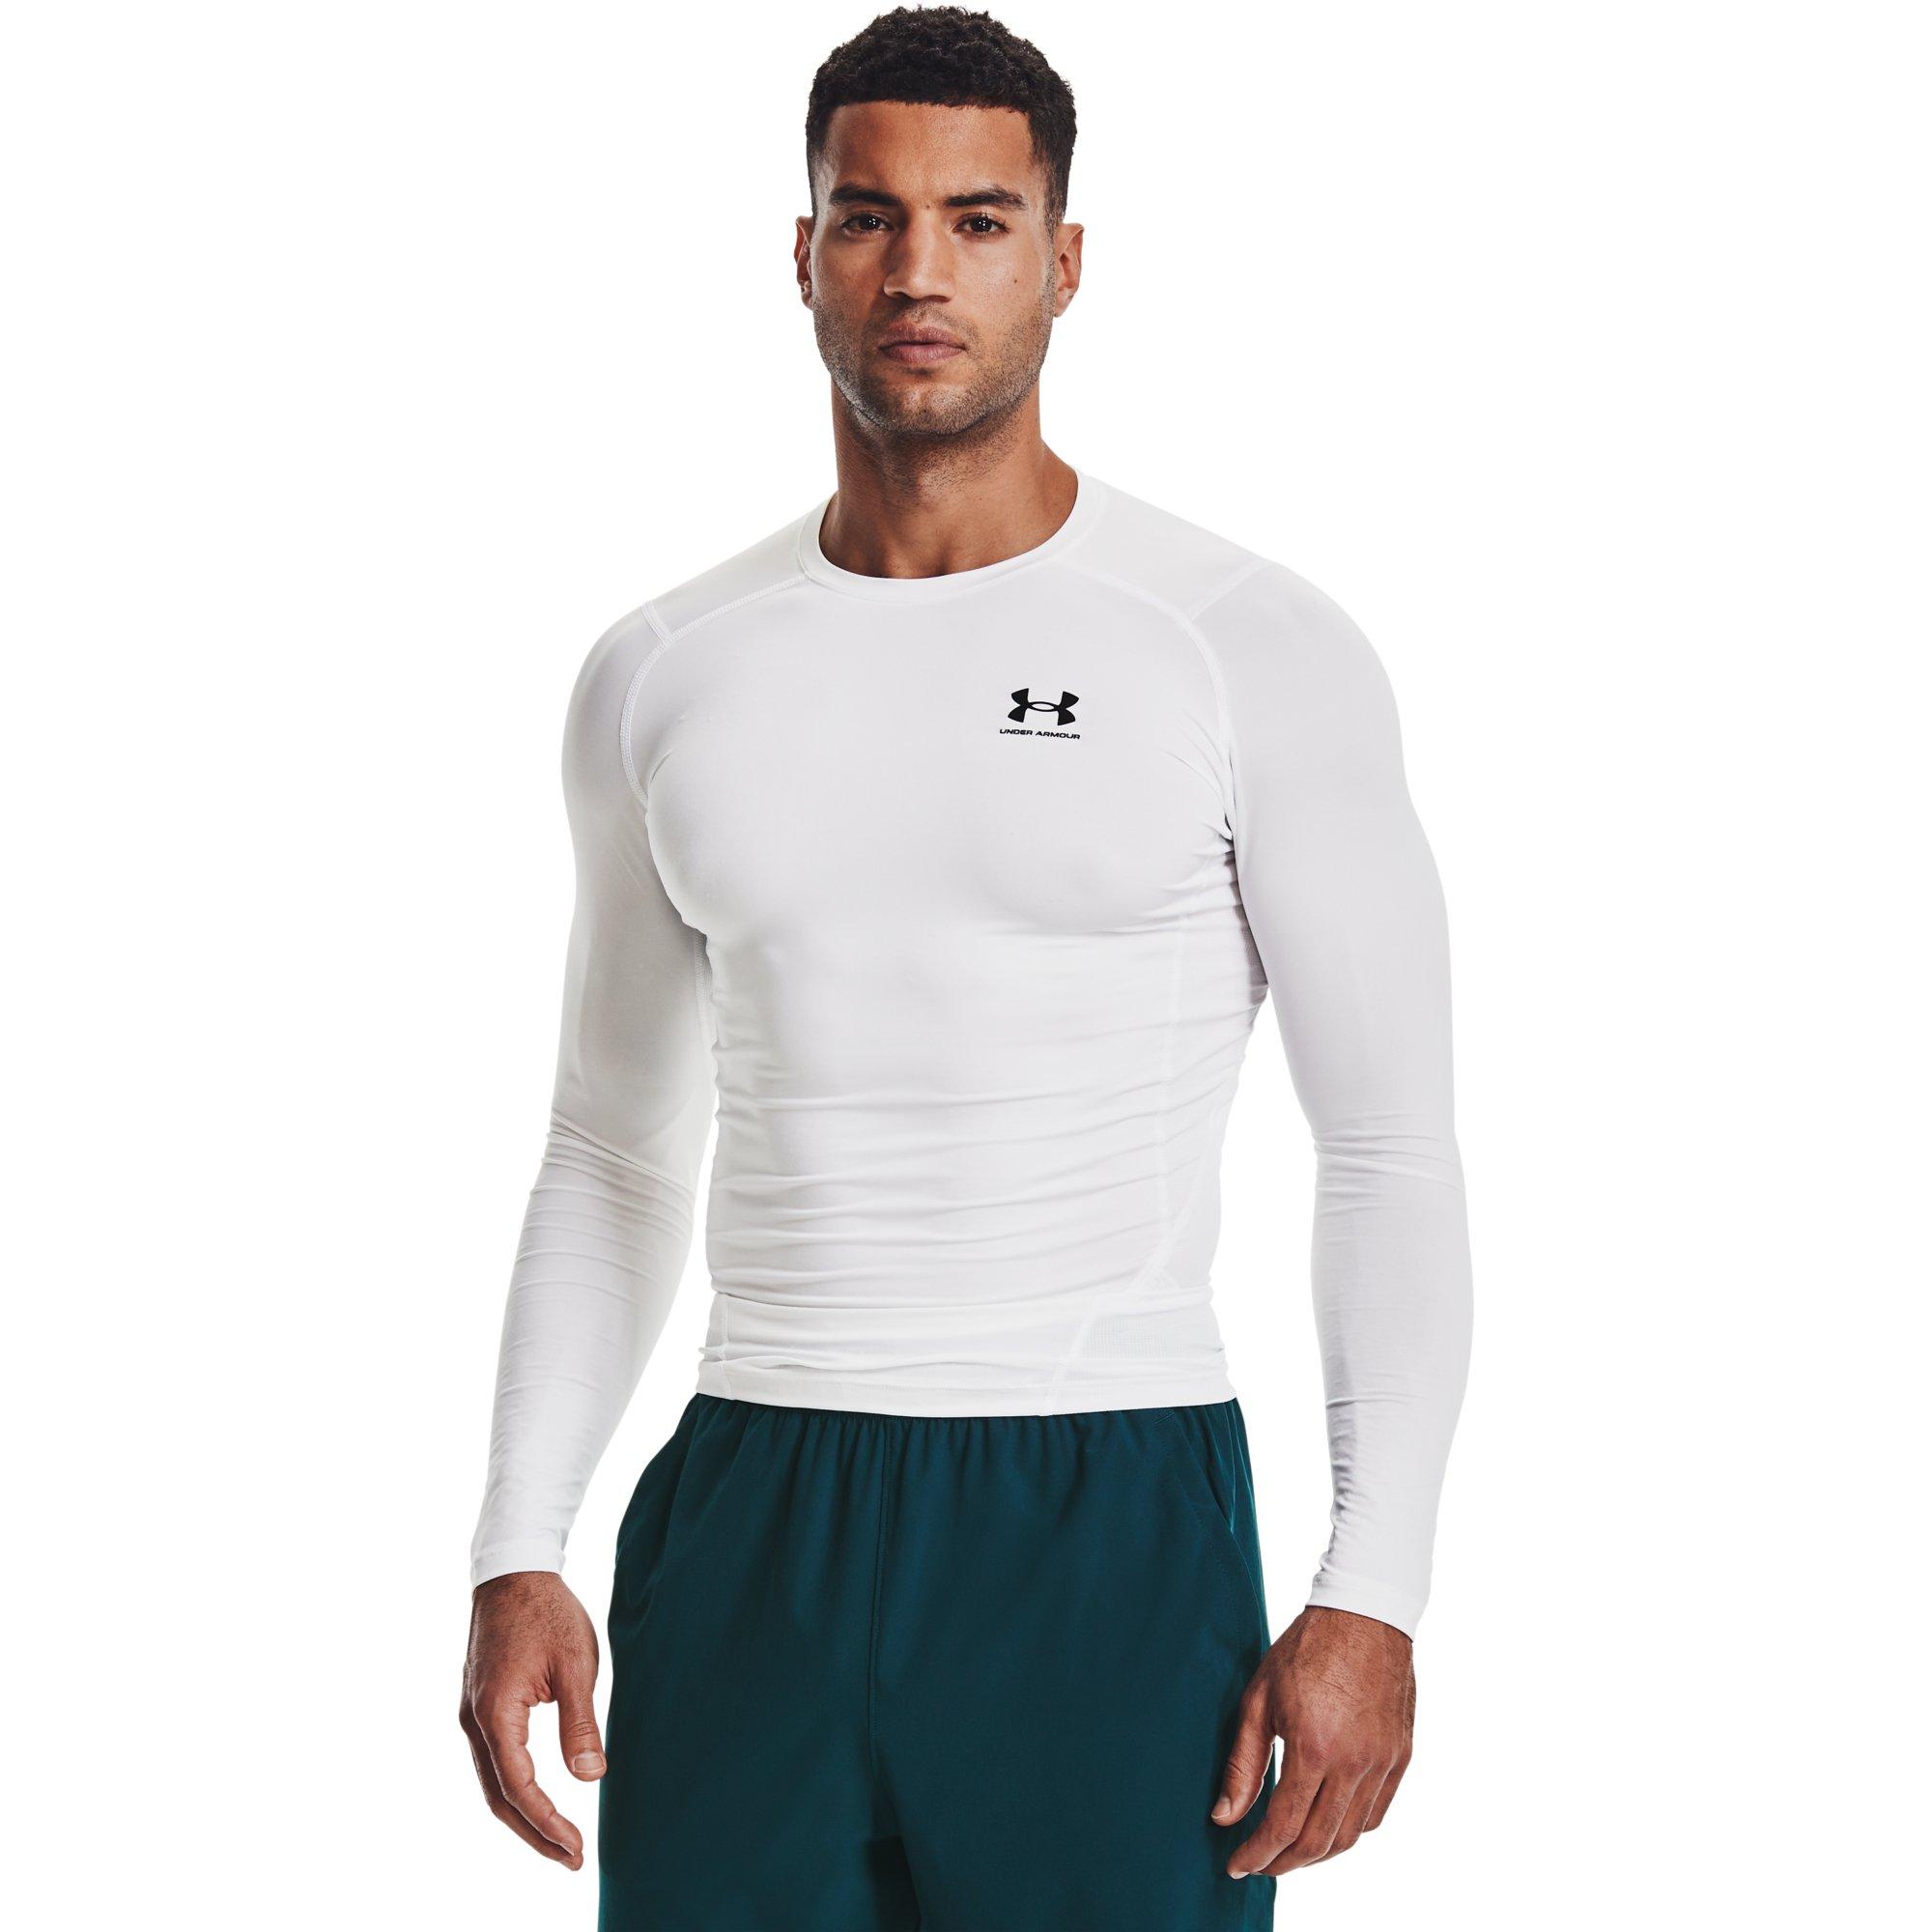 Mens Compression T-shirts Armour Base Layer Tops Sports Muscle Jersey Tee Shirts